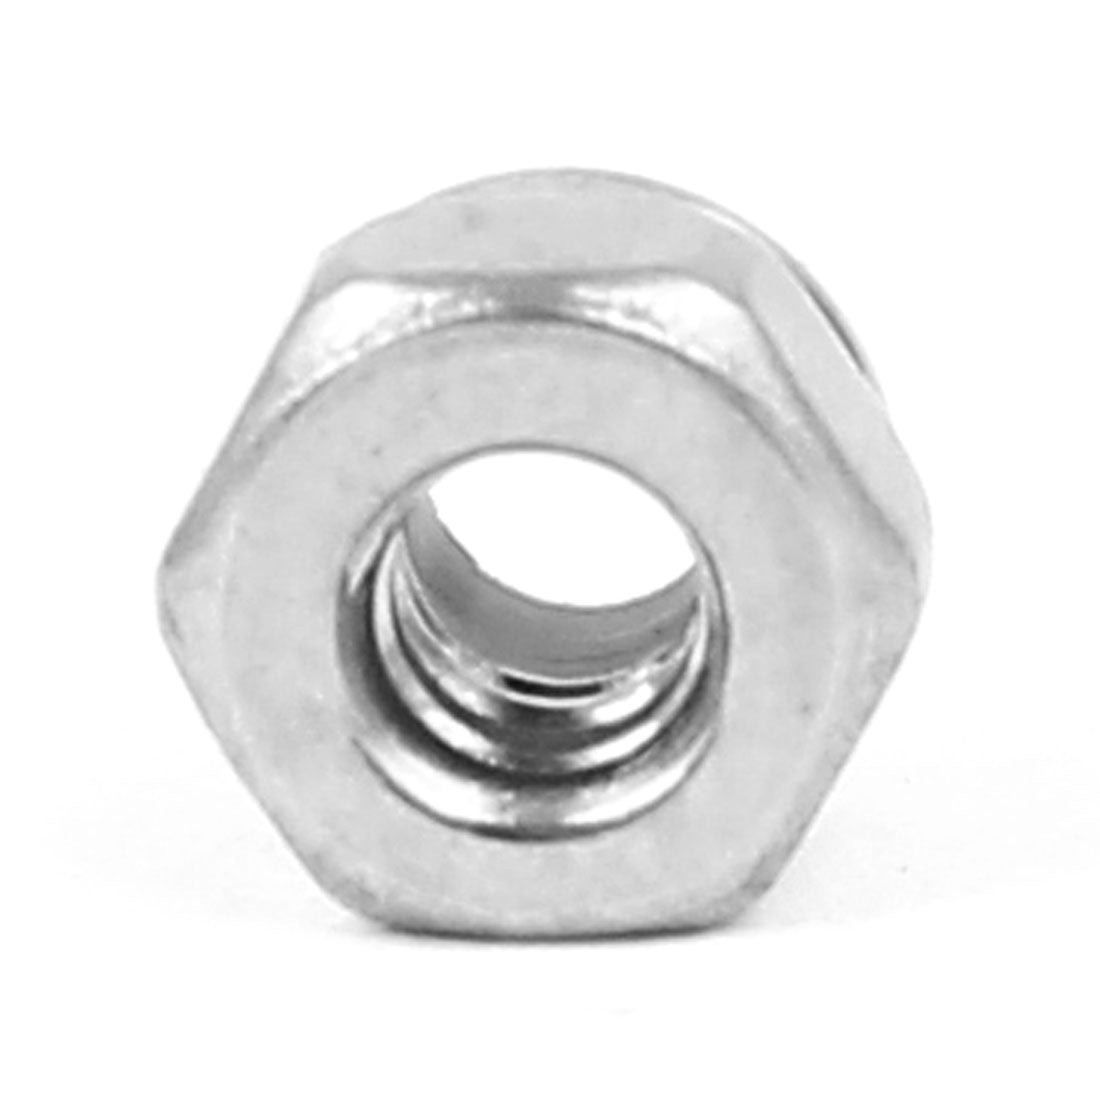 Uxcell Uxcell M5 304 Stainless Steel Nylock Self-Locking Nylon Insert Hex Lock Nuts 100pcs